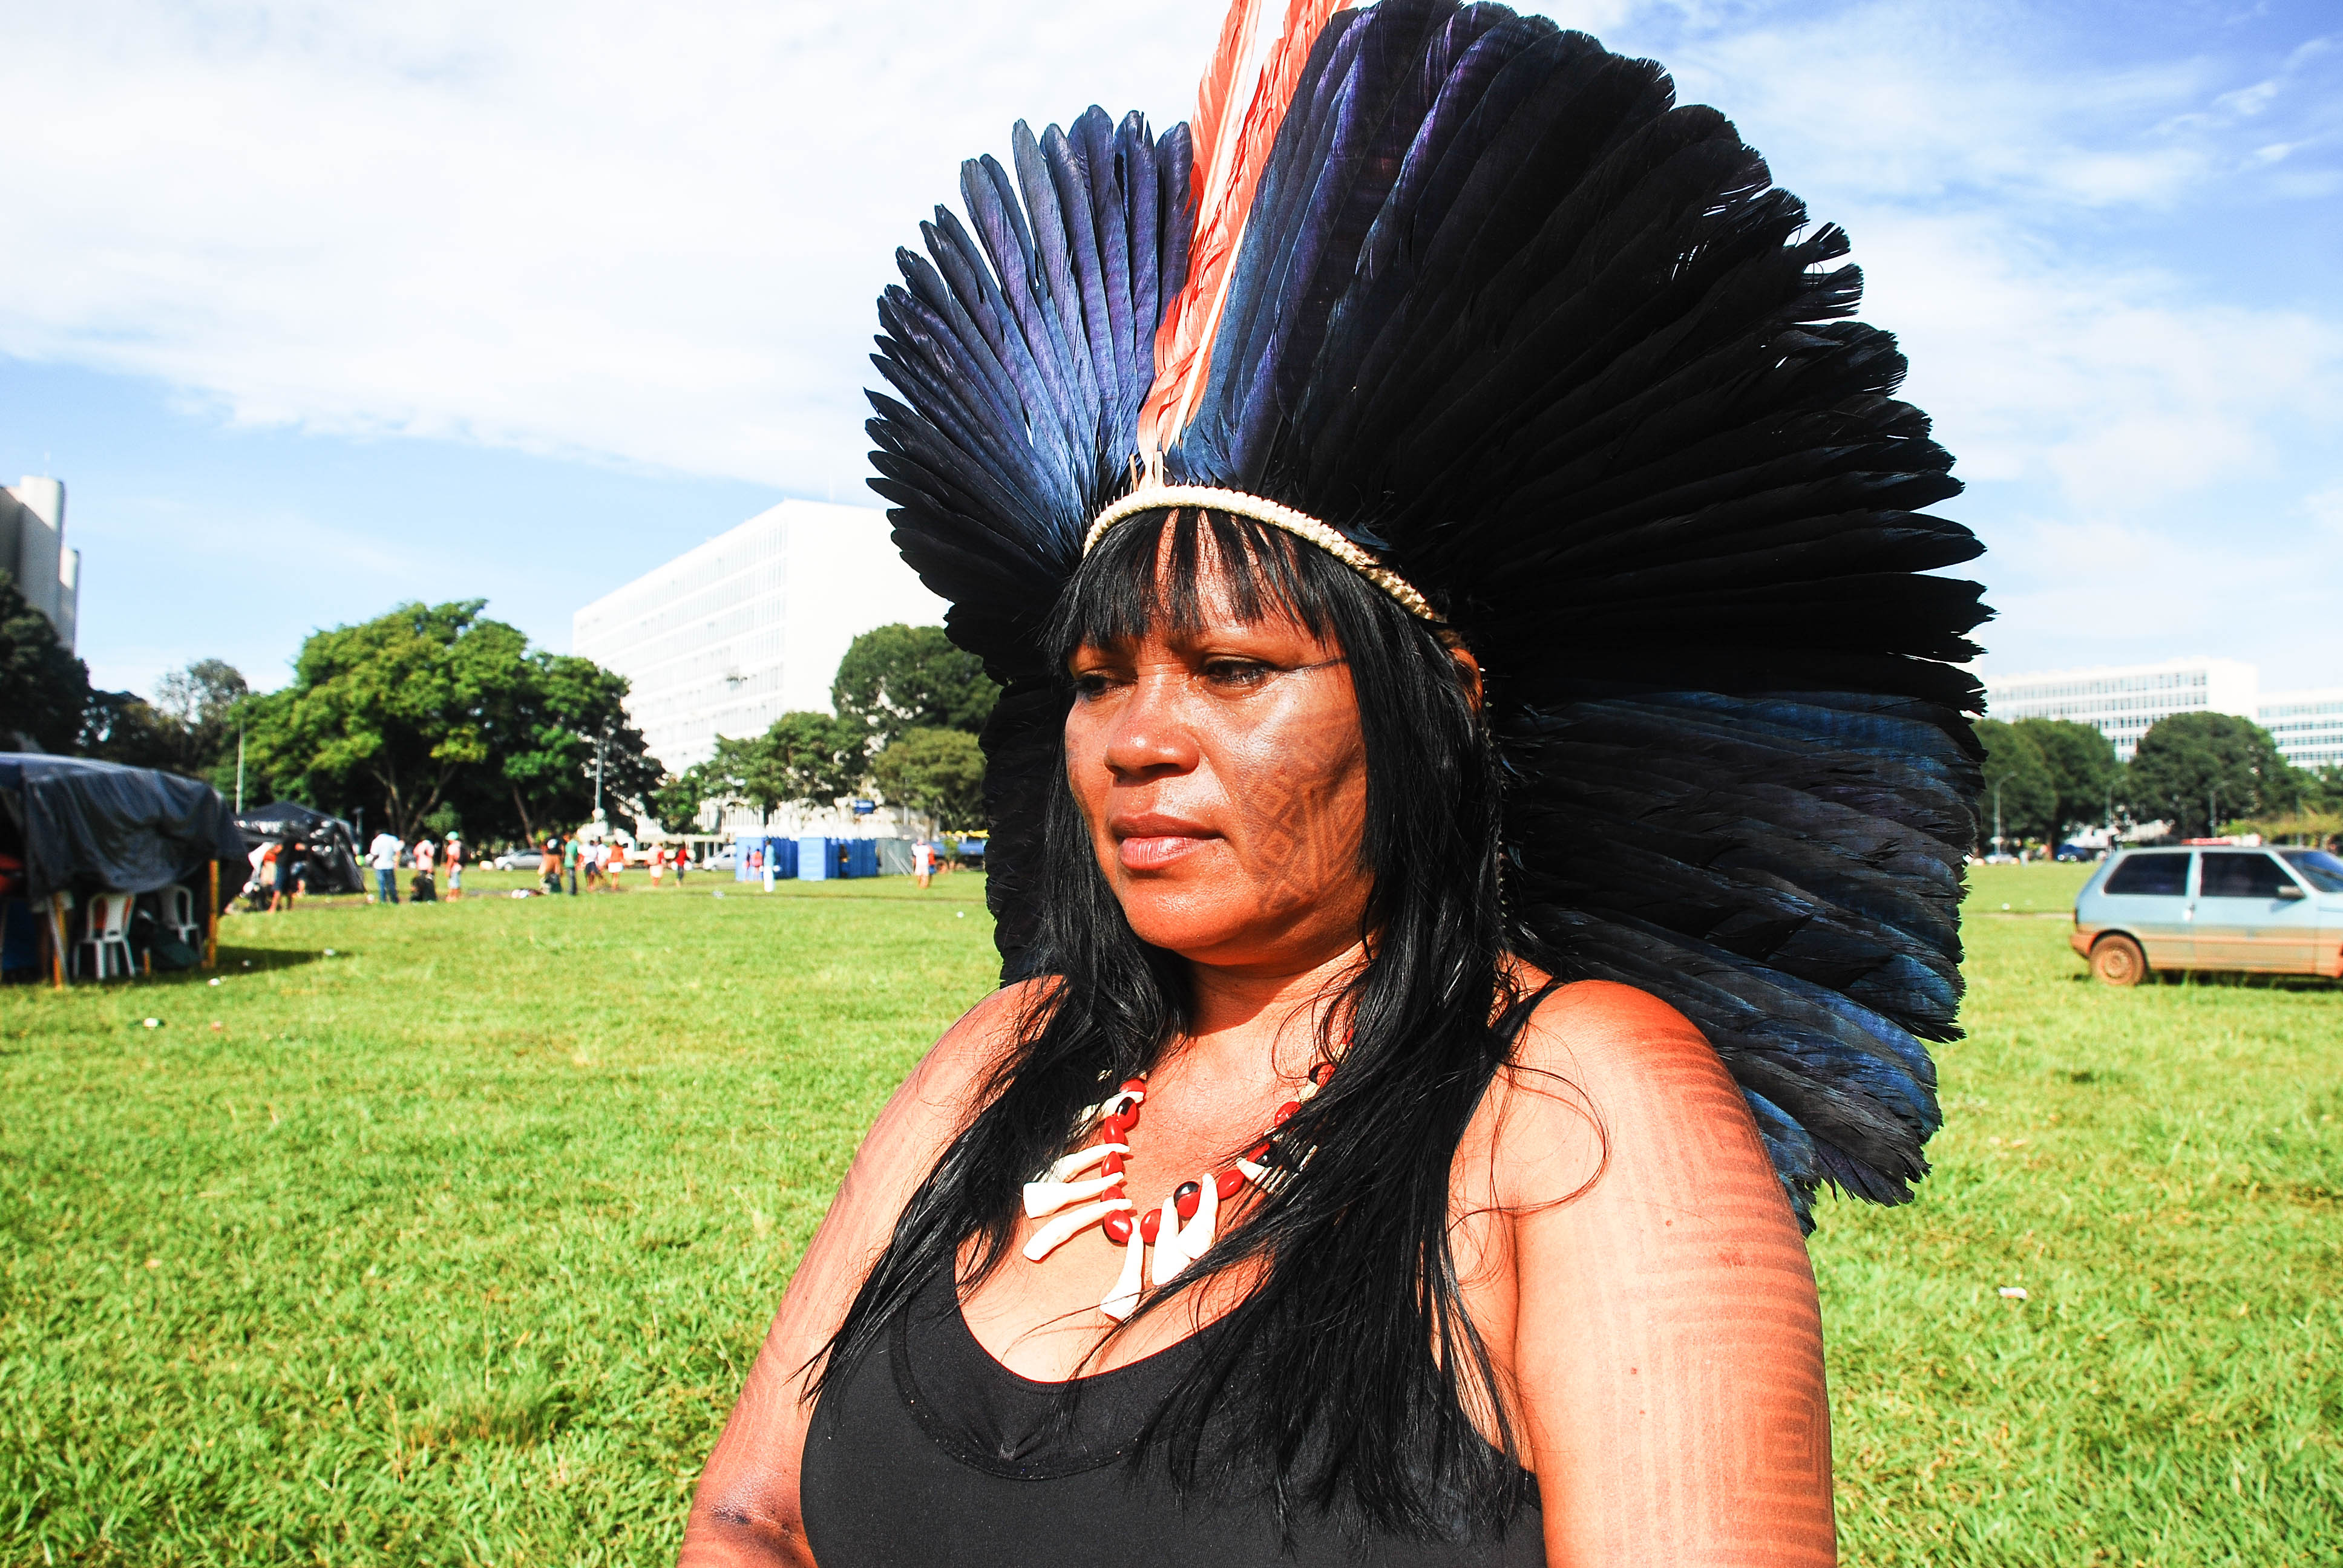 In Brazil, Demarcation of Indigenous Lands Stalls and Violence Worsens